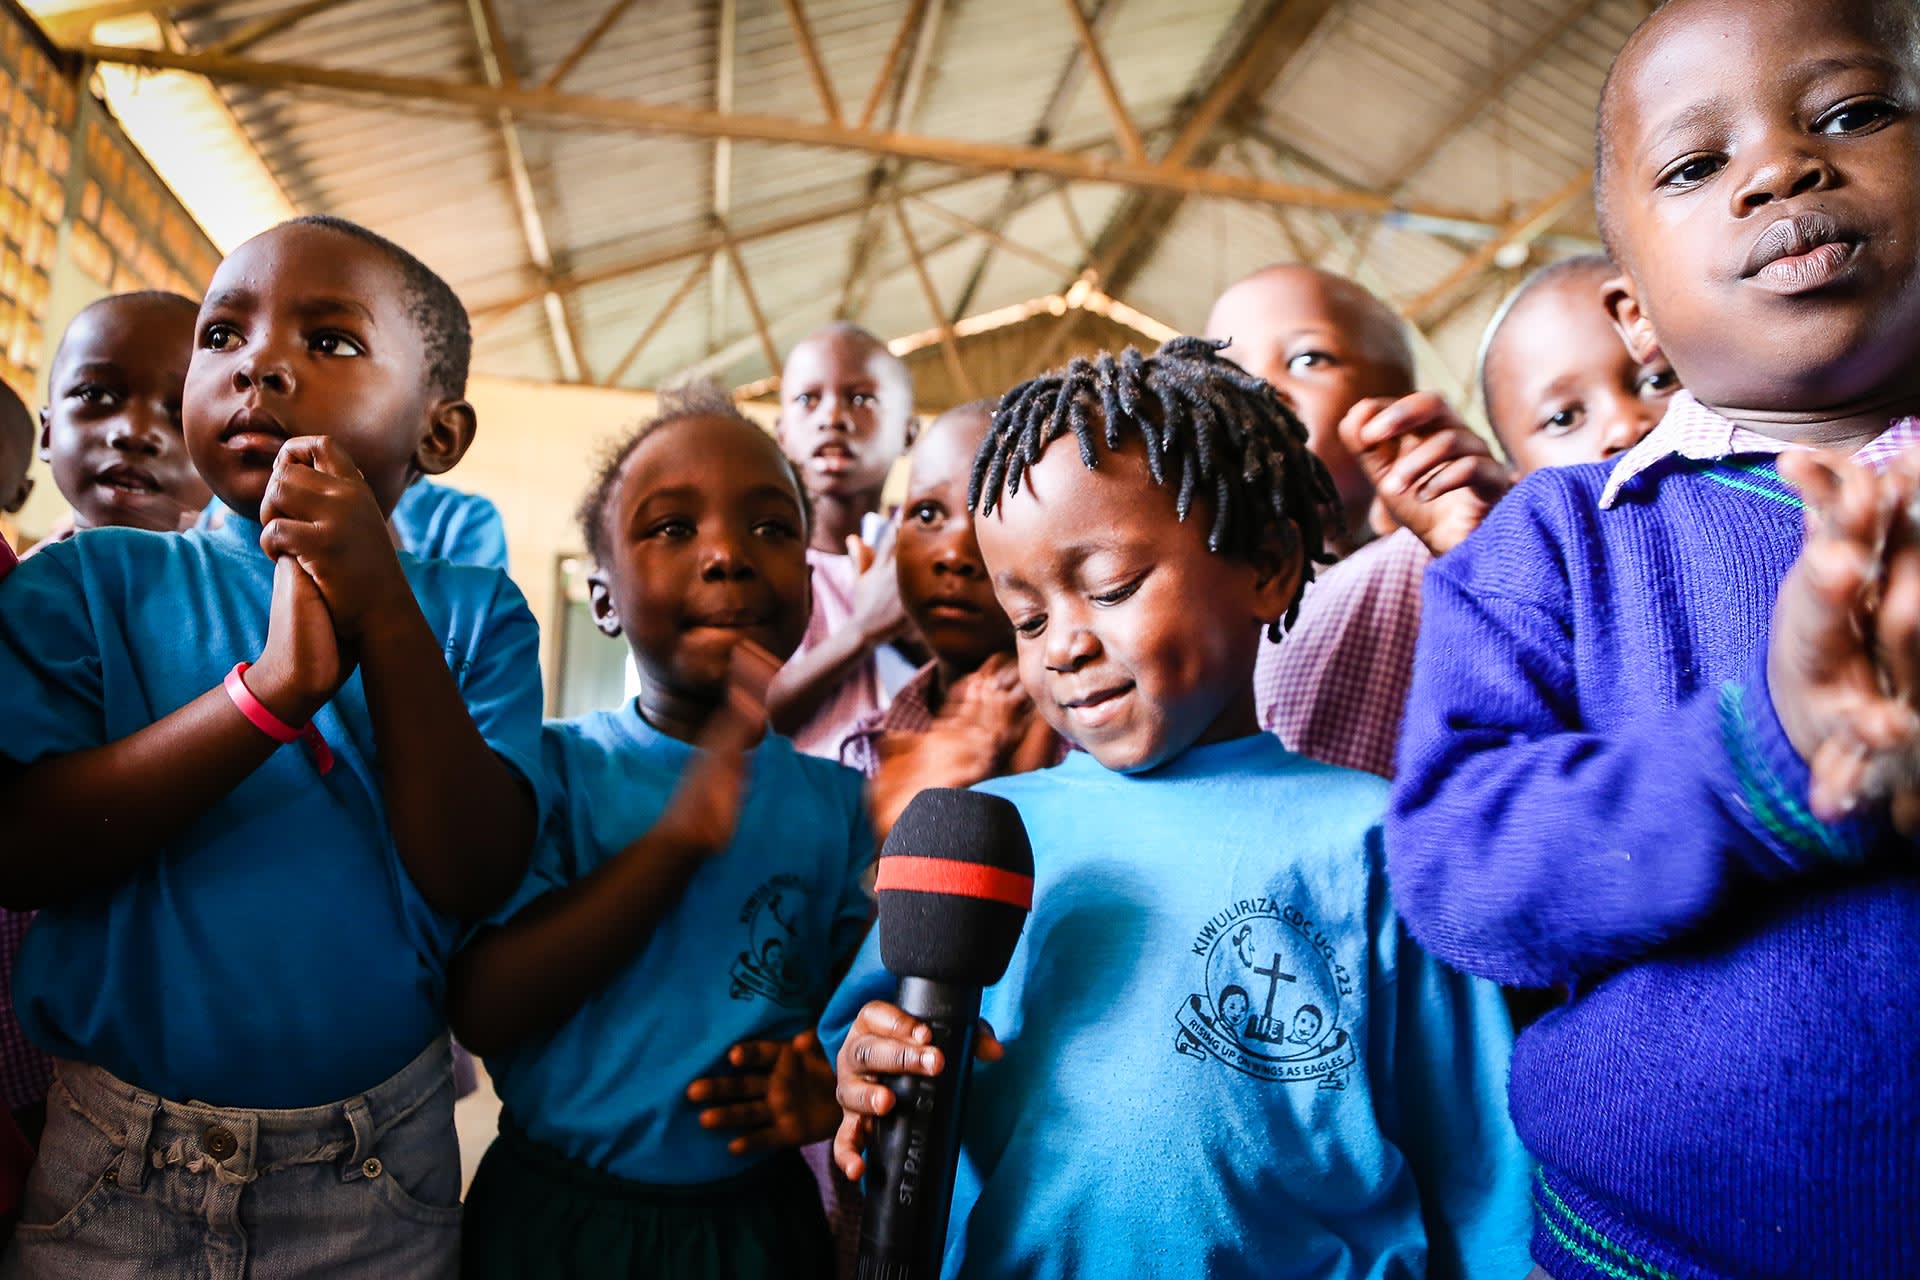 A child looks down at a microphone as other children crowd around.